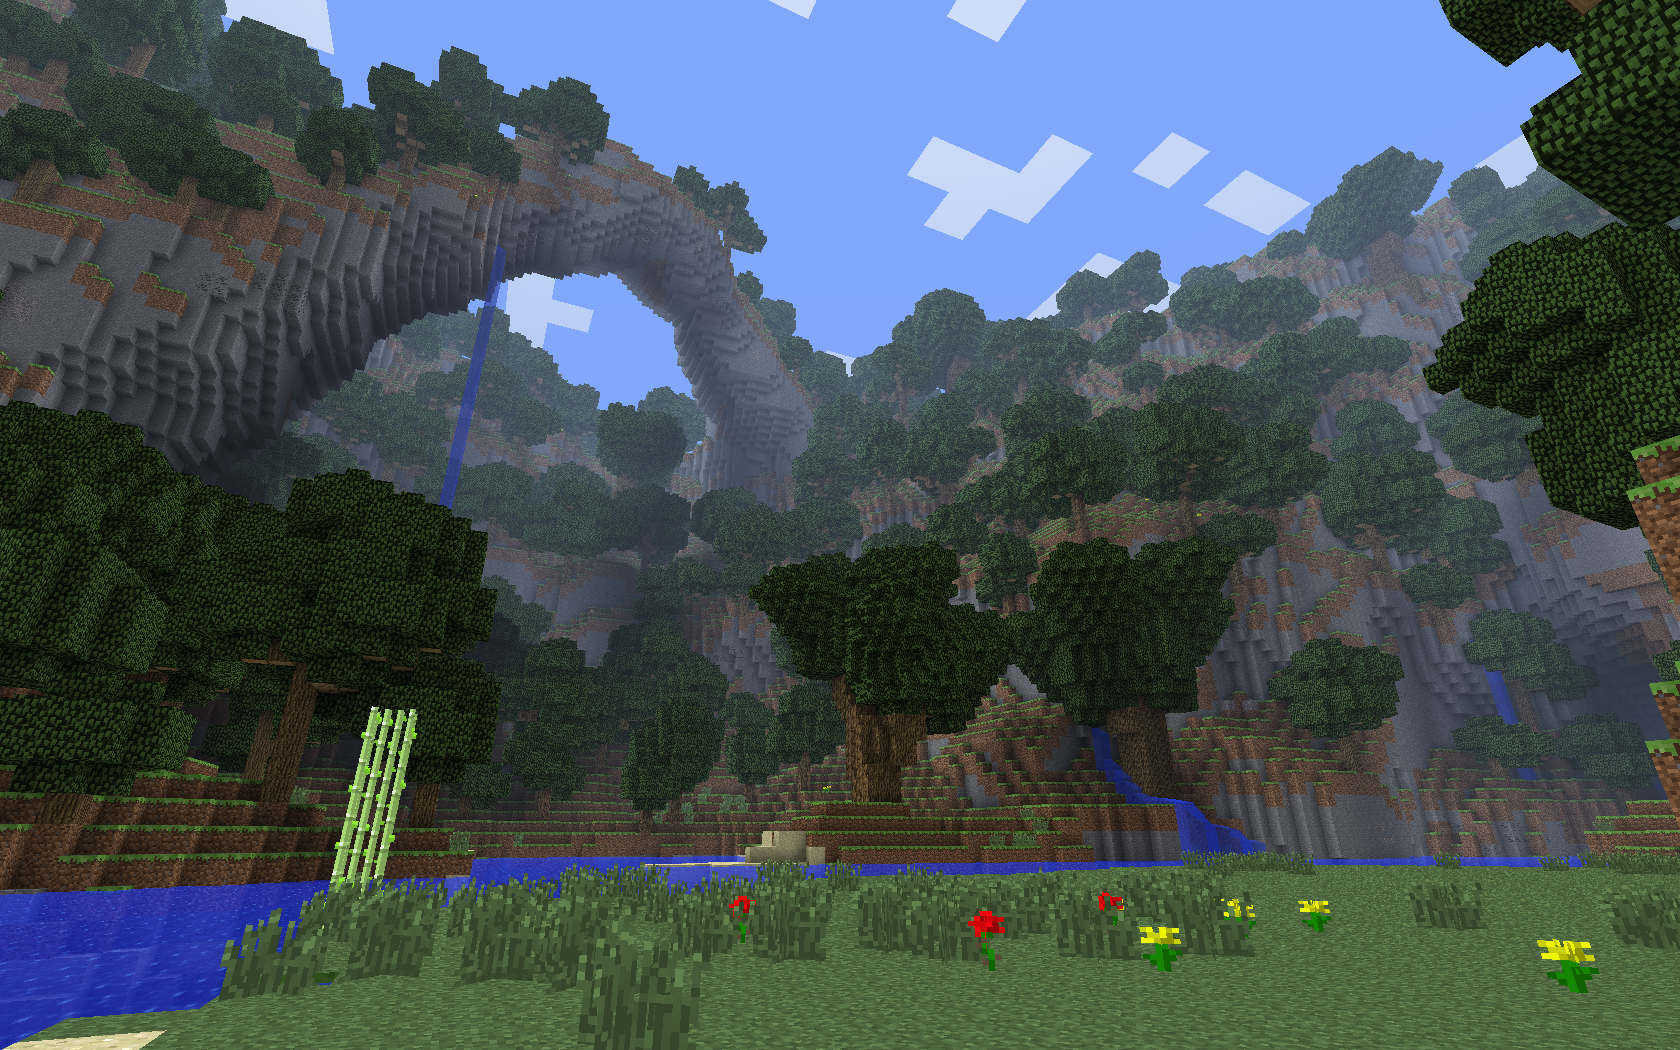 Epic Minecraft Scenery By Tugtugbug